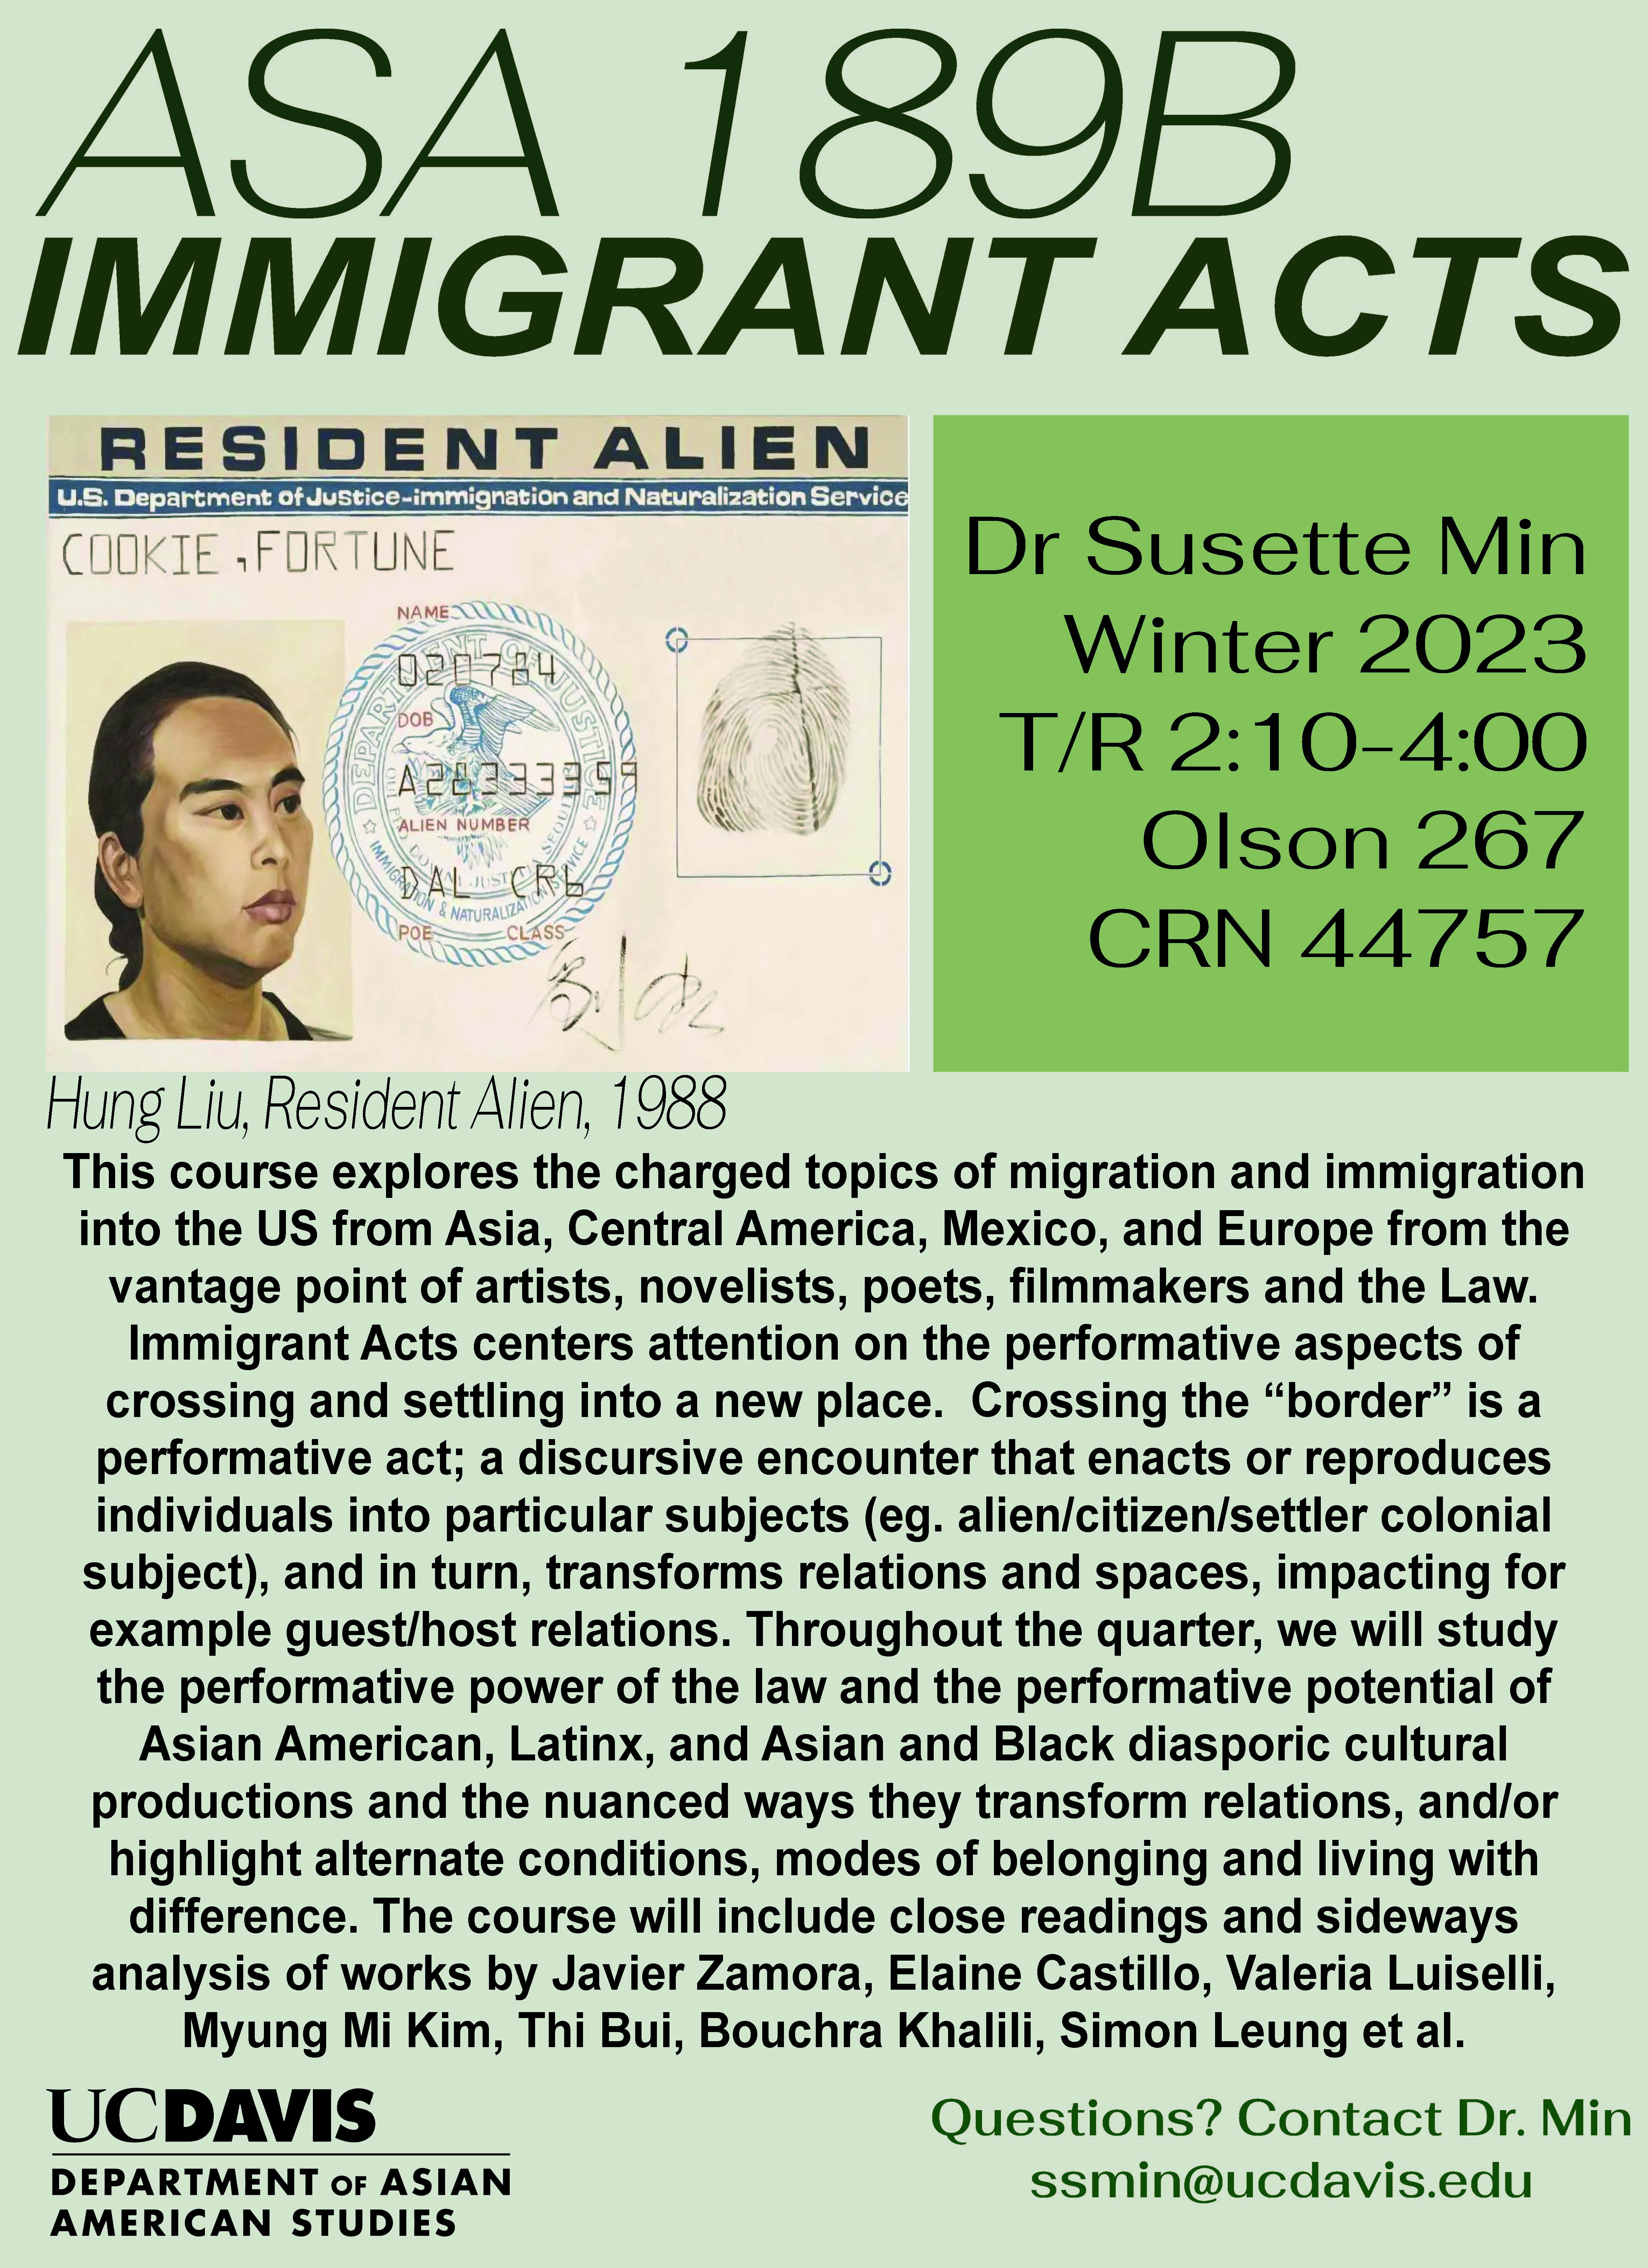 ASA 189B Immigrant Acts course flyers for Winter 2023